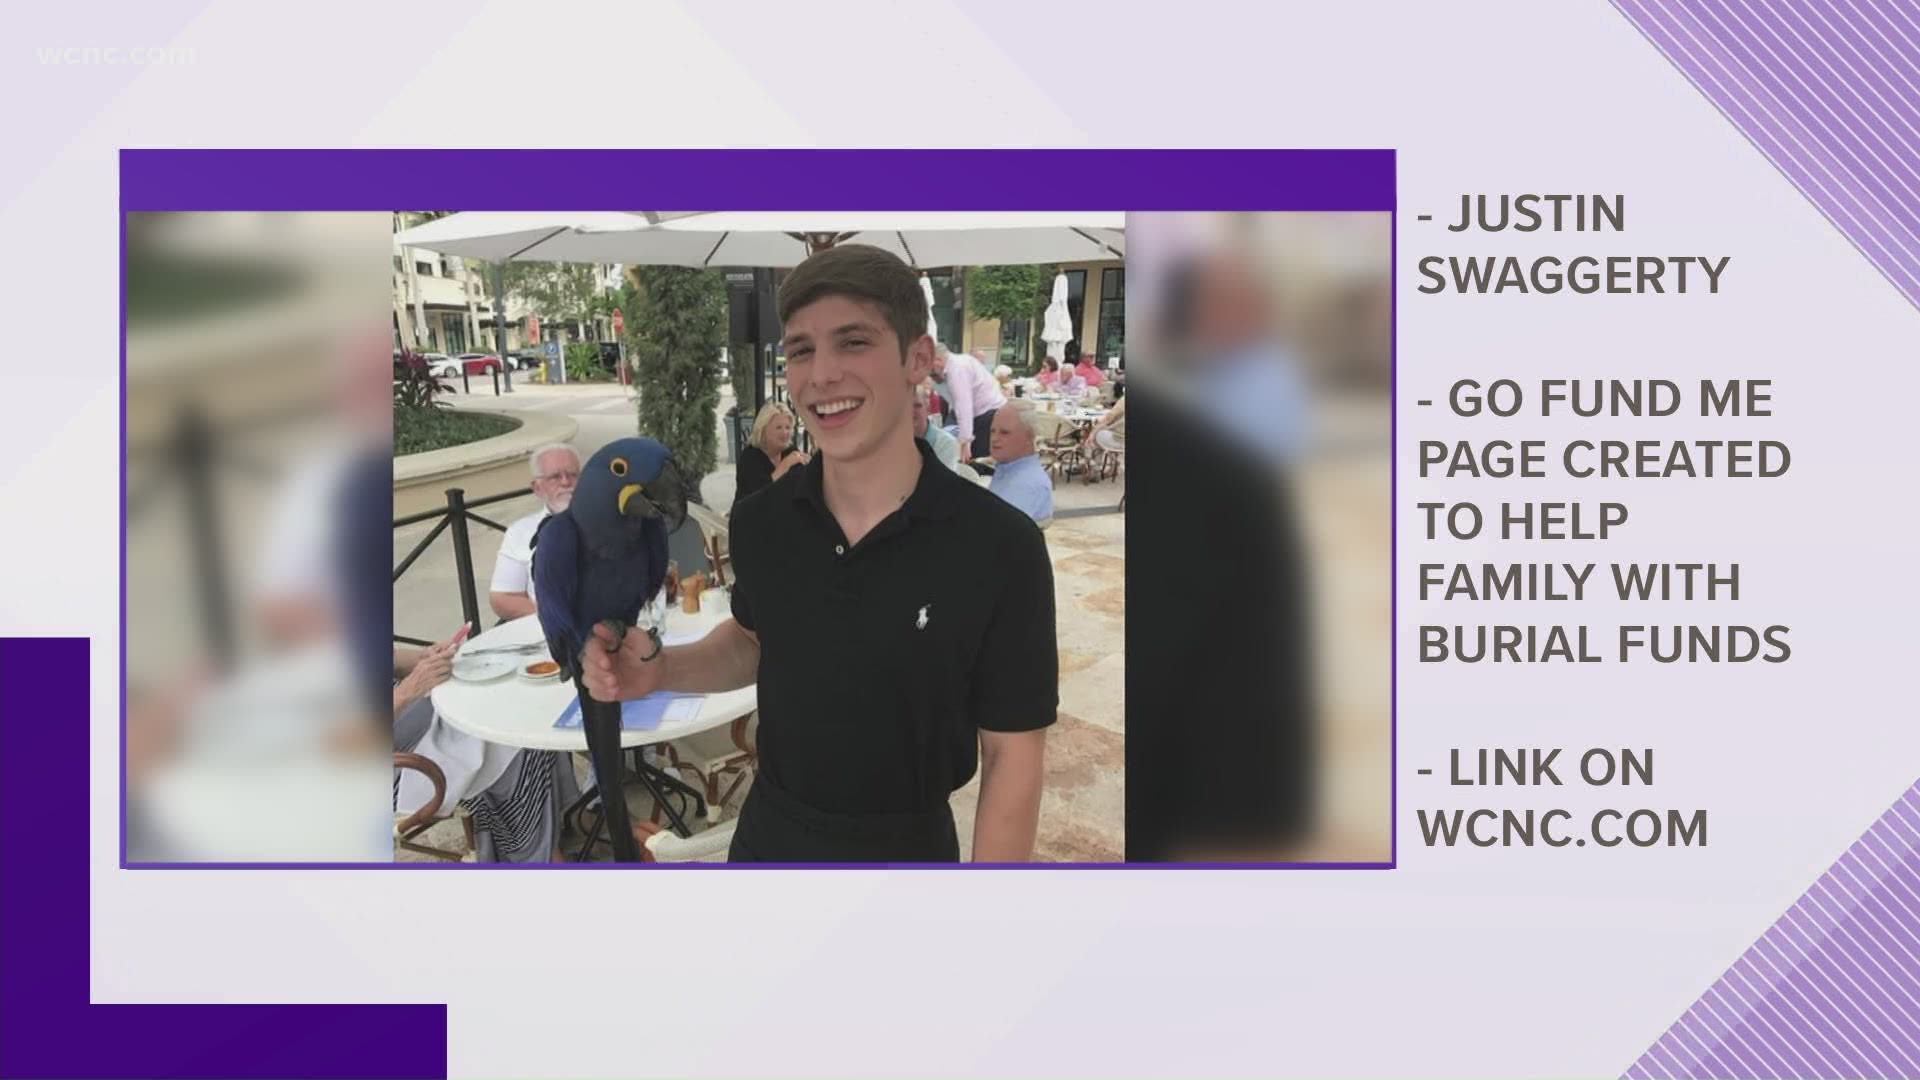 20-year-old Justin Swaggerty was killed in the skydiving accident.